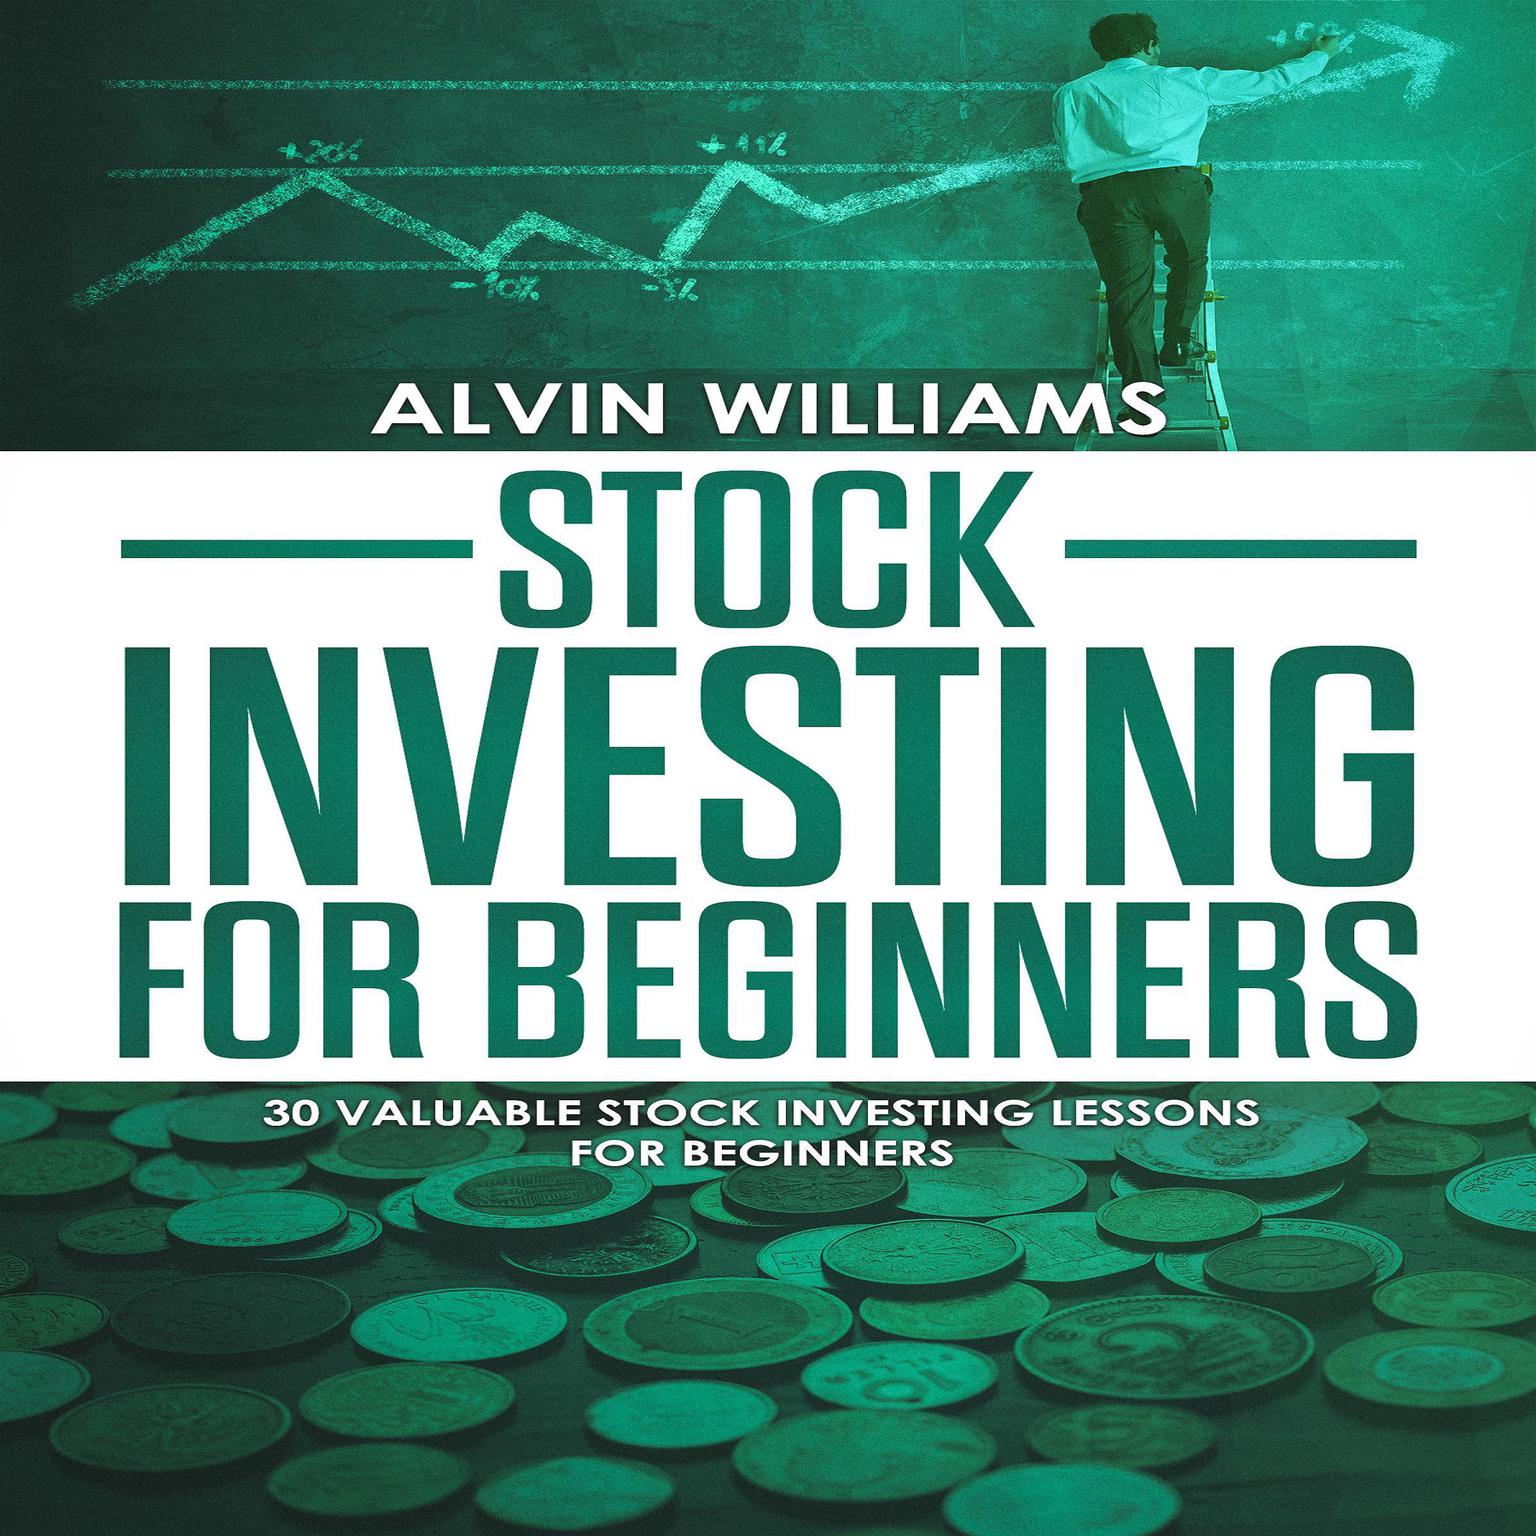 Stock Investing for Beginners: 30 Valuable Stock Investing Lessons for Beginners (Abridged) Audiobook, by Alvin Williams